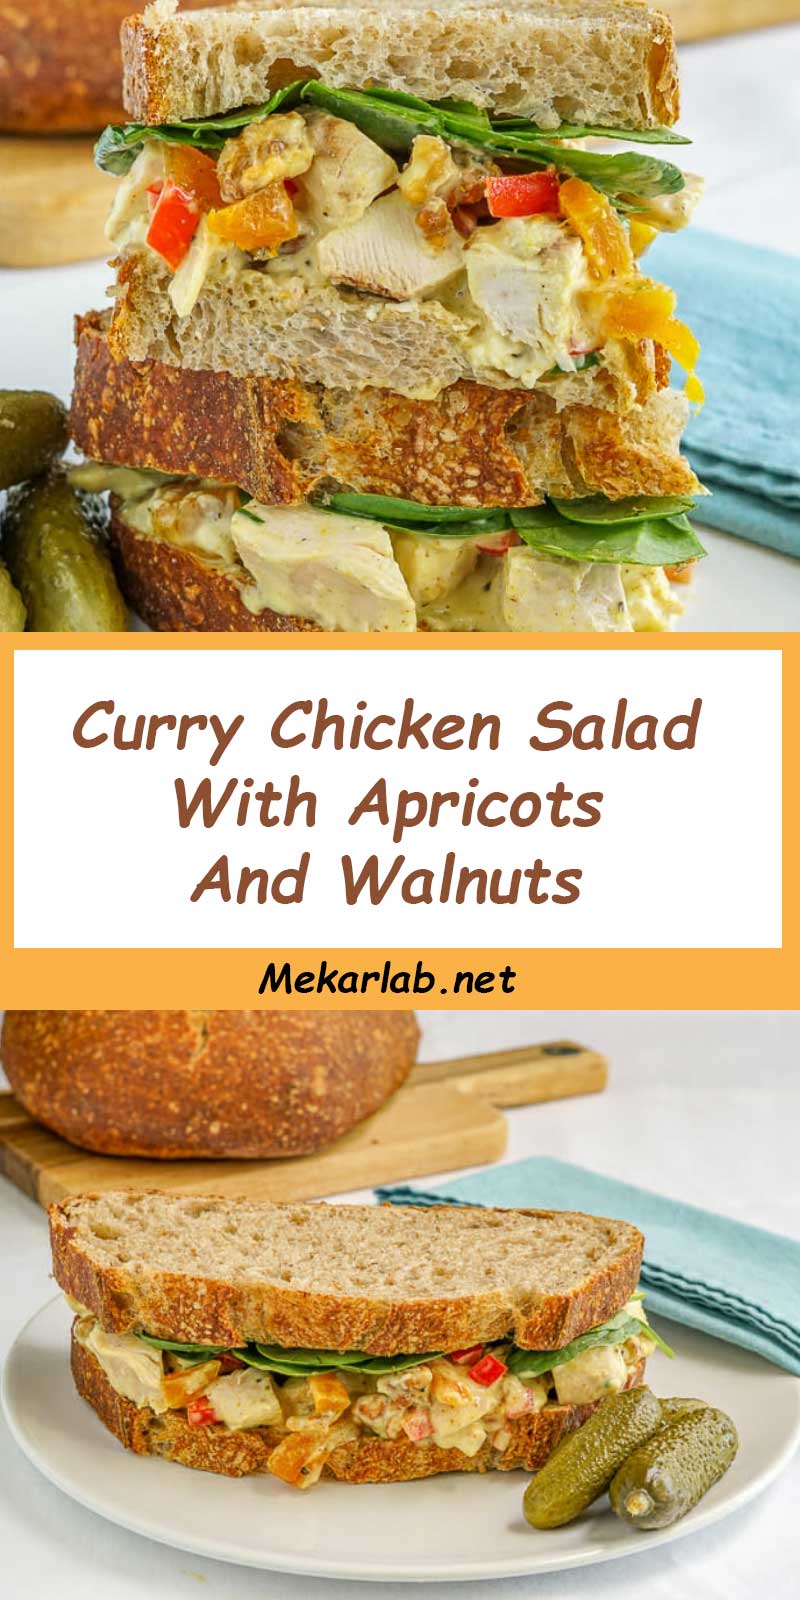 Curry Chicken Salad With Apricots And Walnuts